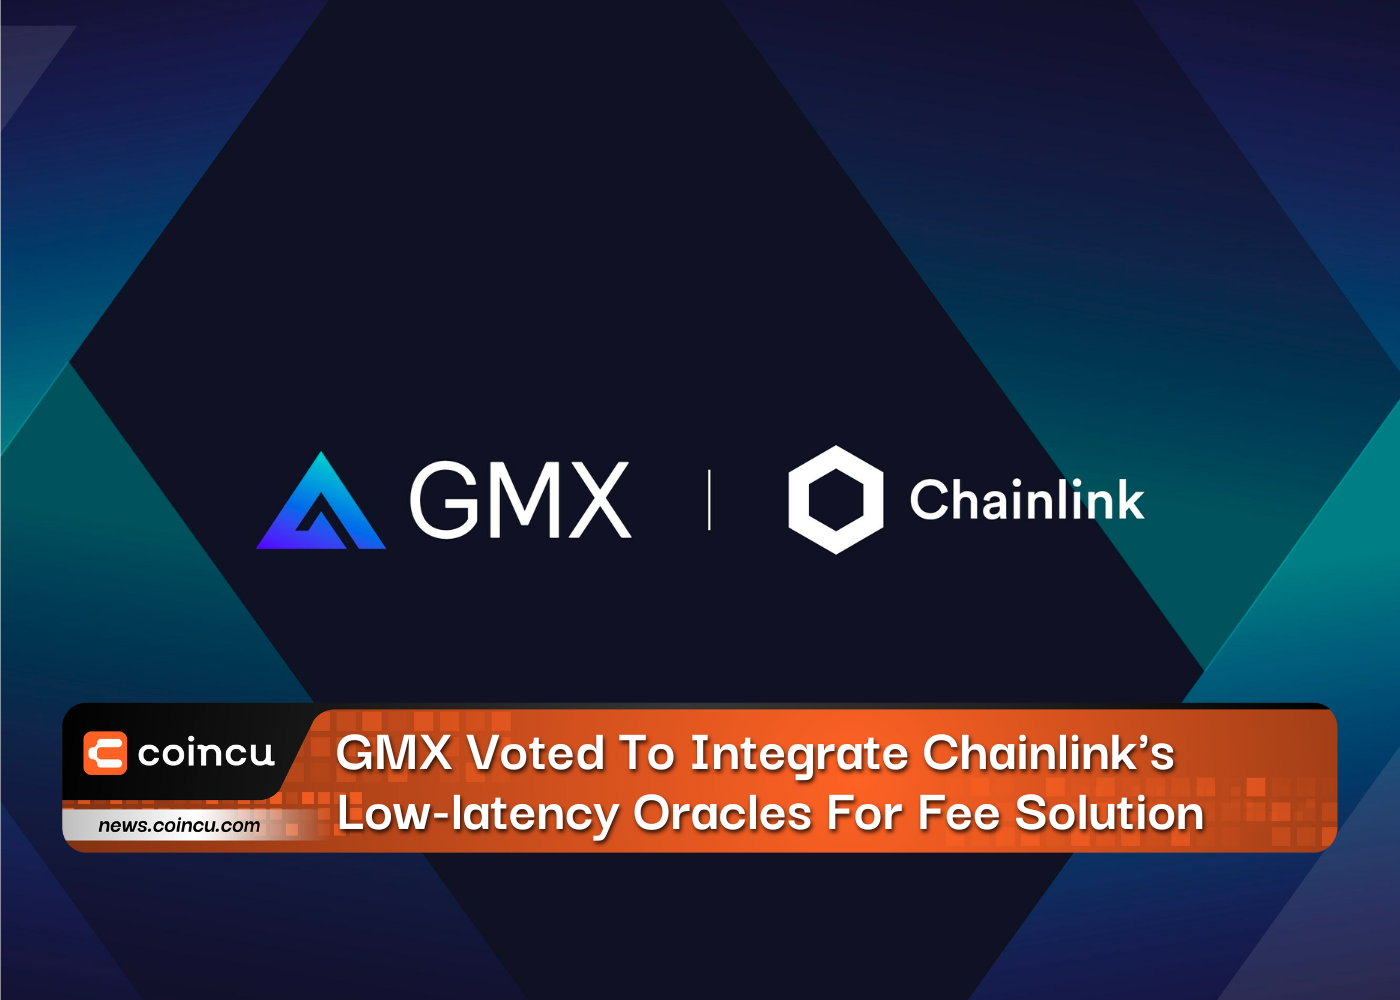 GMX Voted To Integrate Chainlink's Low-latency Oracles For Fee Solution